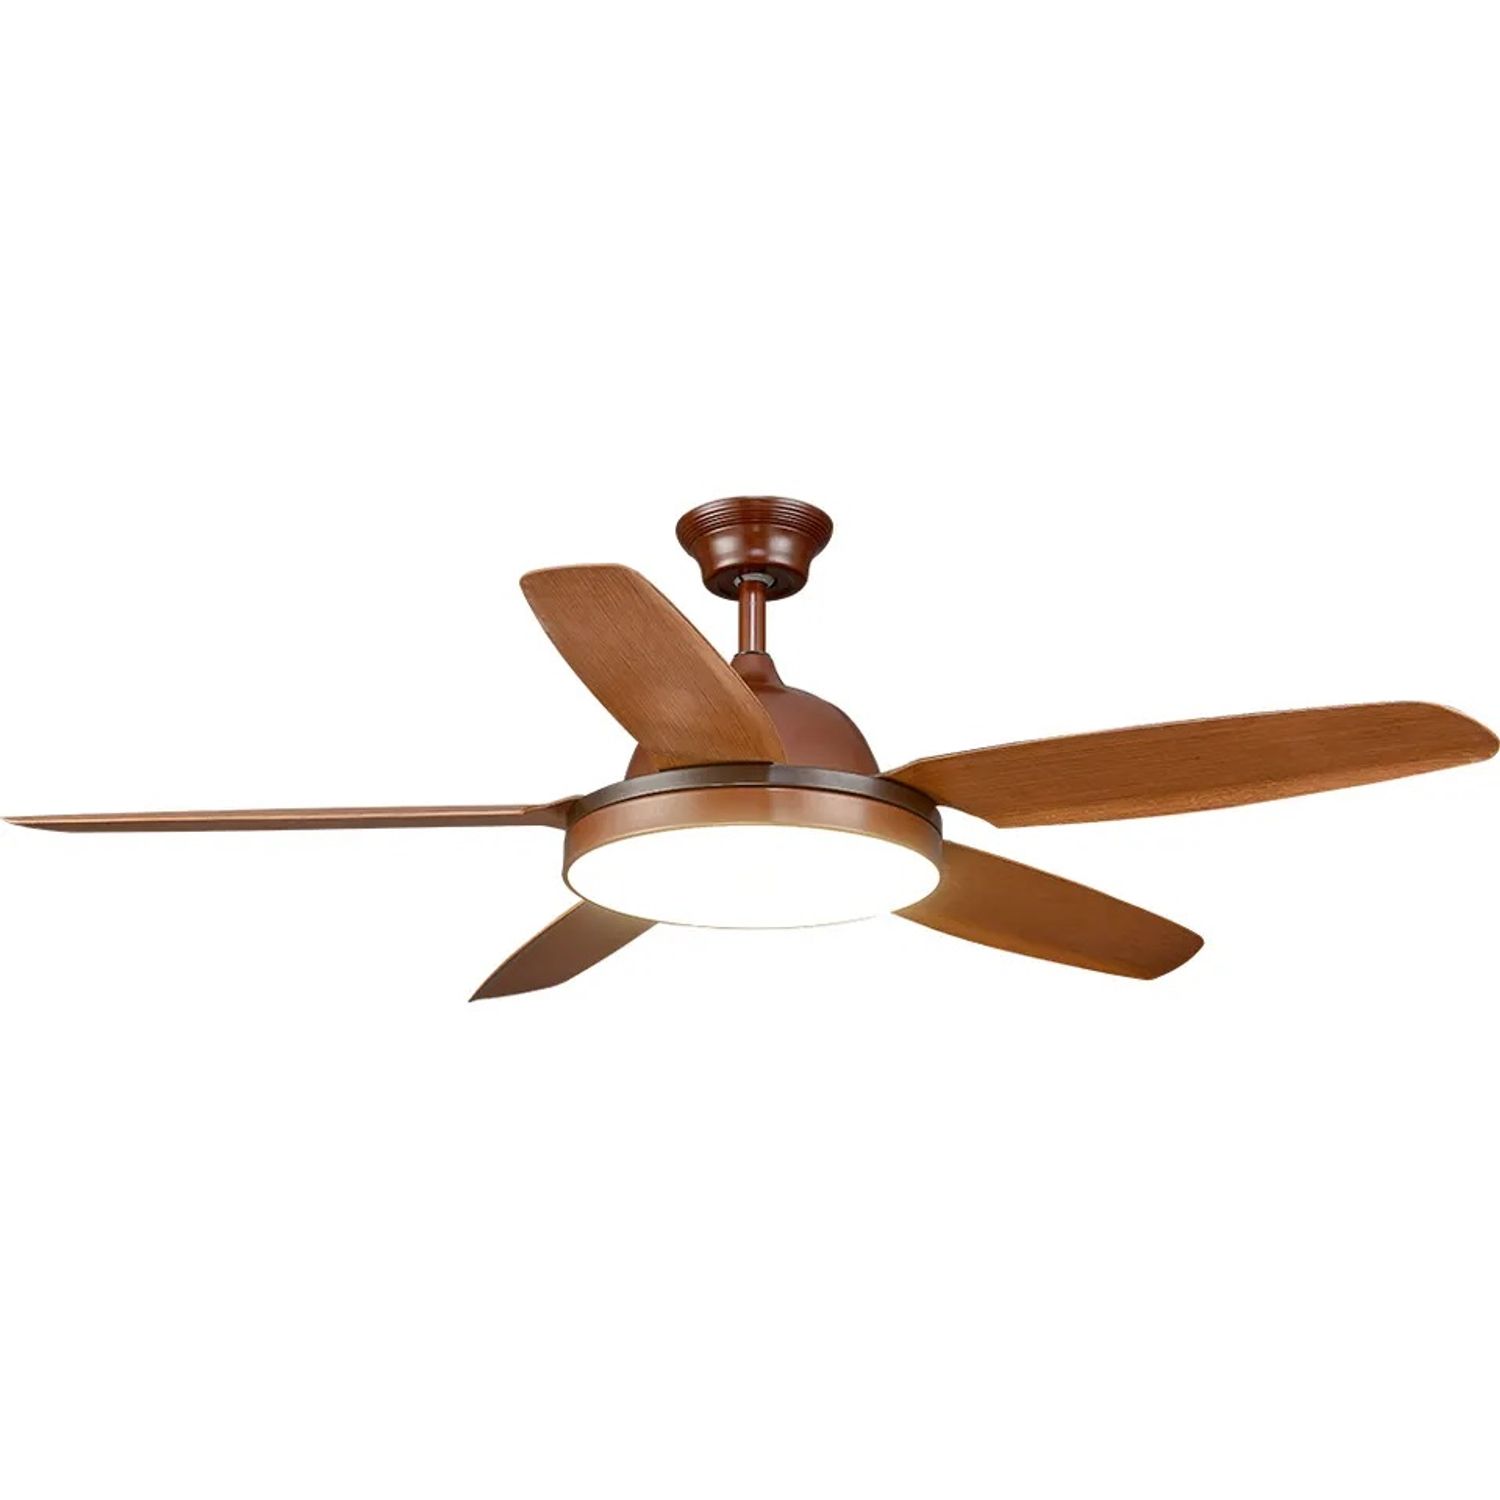 KBS wholesale Modern 5 Blade Ceiling Fan with Light and Remote